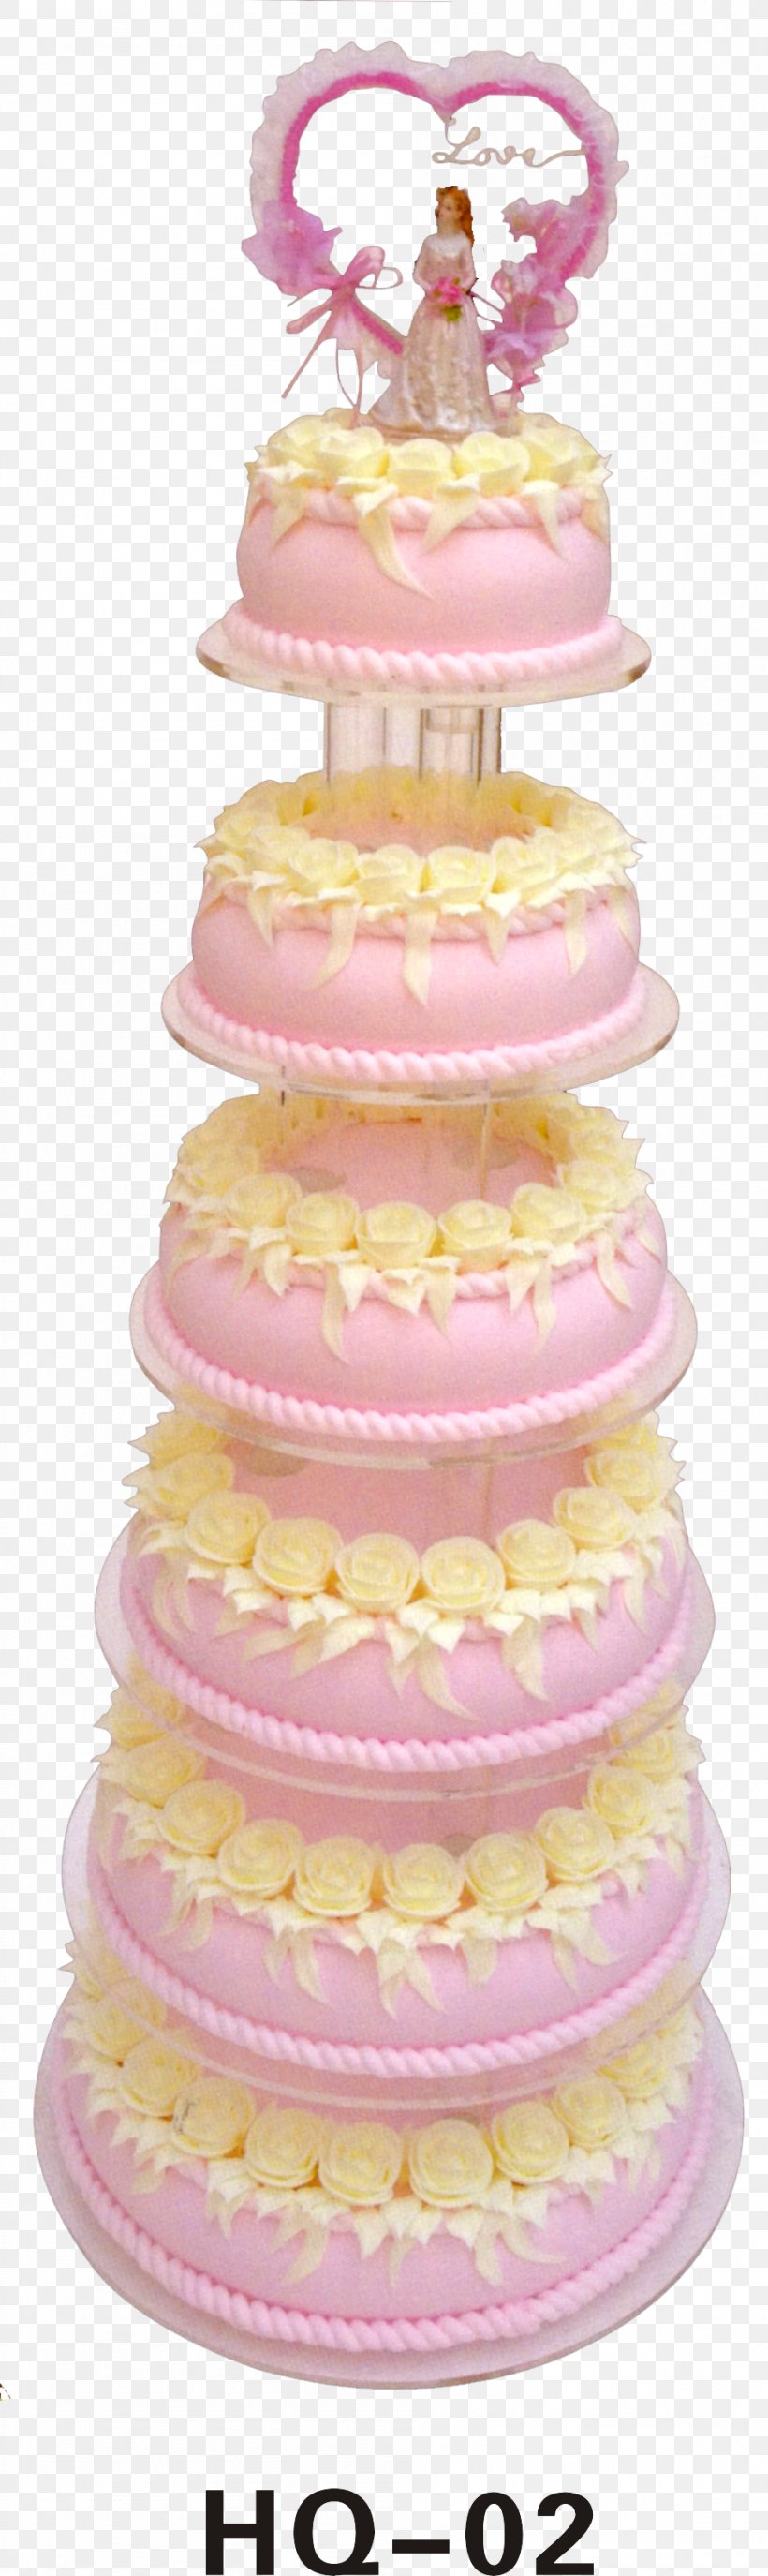 Wedding Cake Torte Layer Cake Pastry, PNG, 947x3175px, Wedding Cake, Buttercream, Cake, Cake Decorating, Cream Download Free